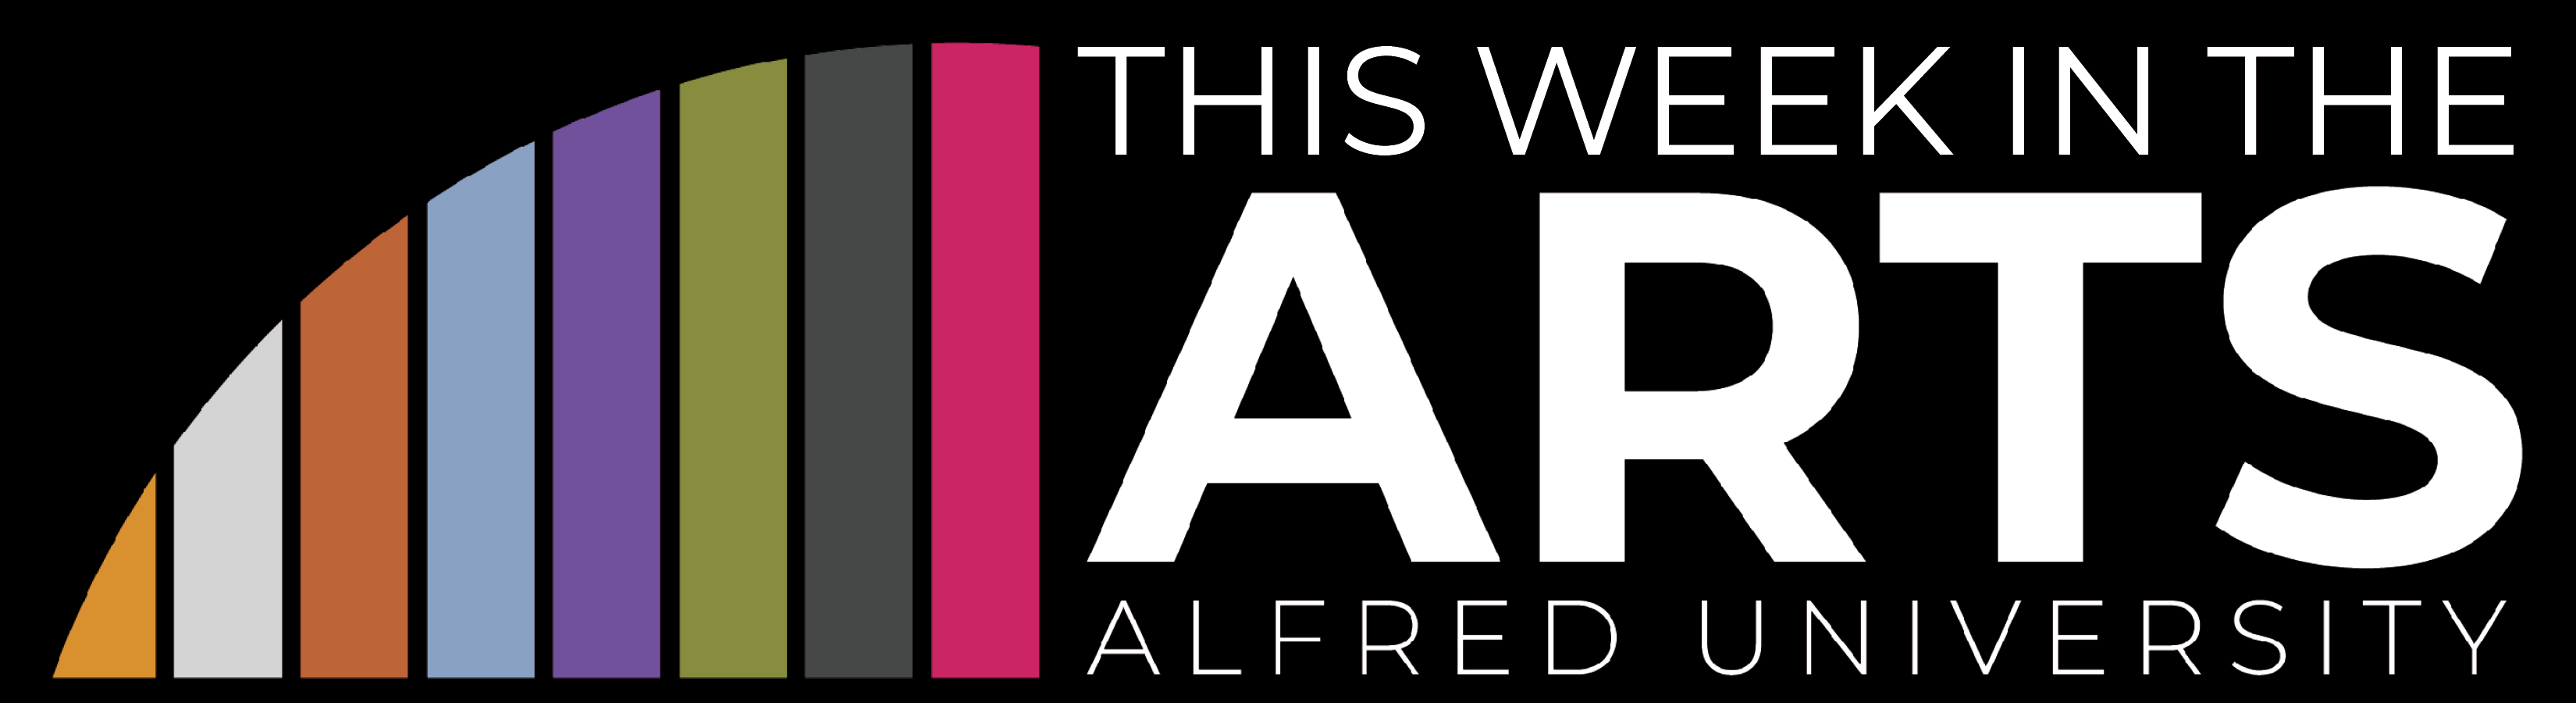 this week in the arts logo